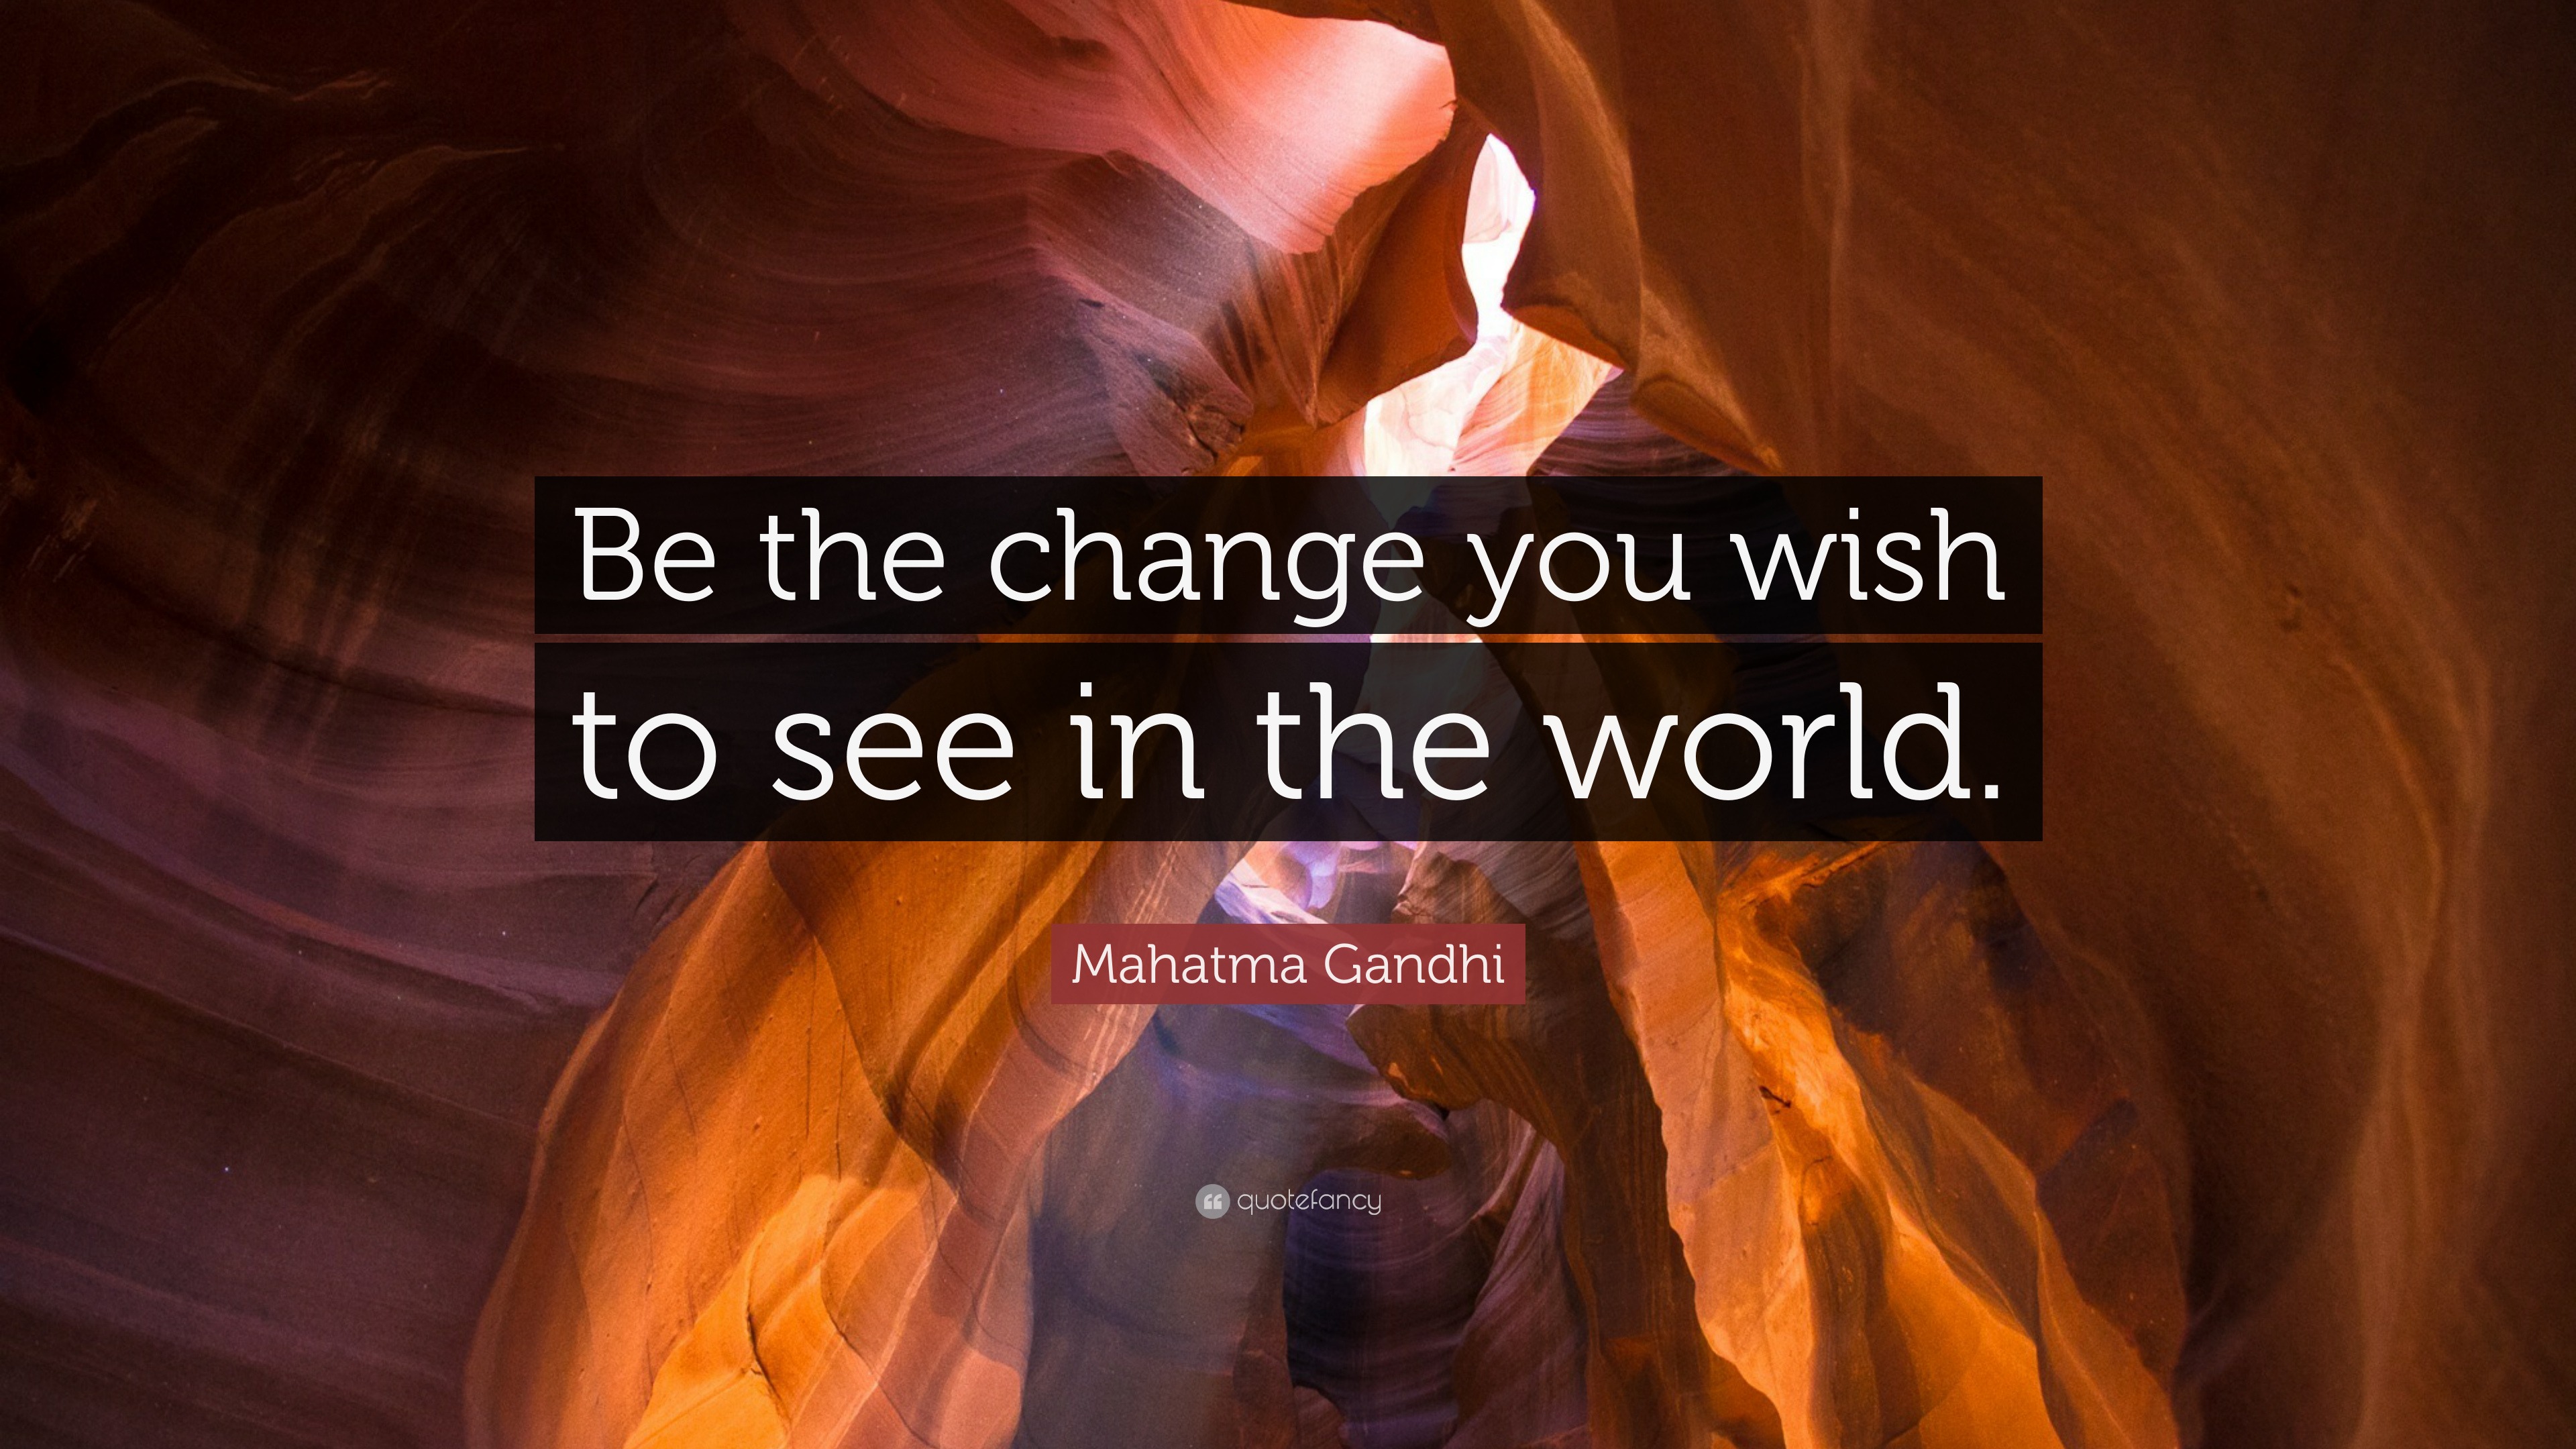 mahatma-gandhi-quote-be-the-change-you-wish-to-see-in-the-world-35